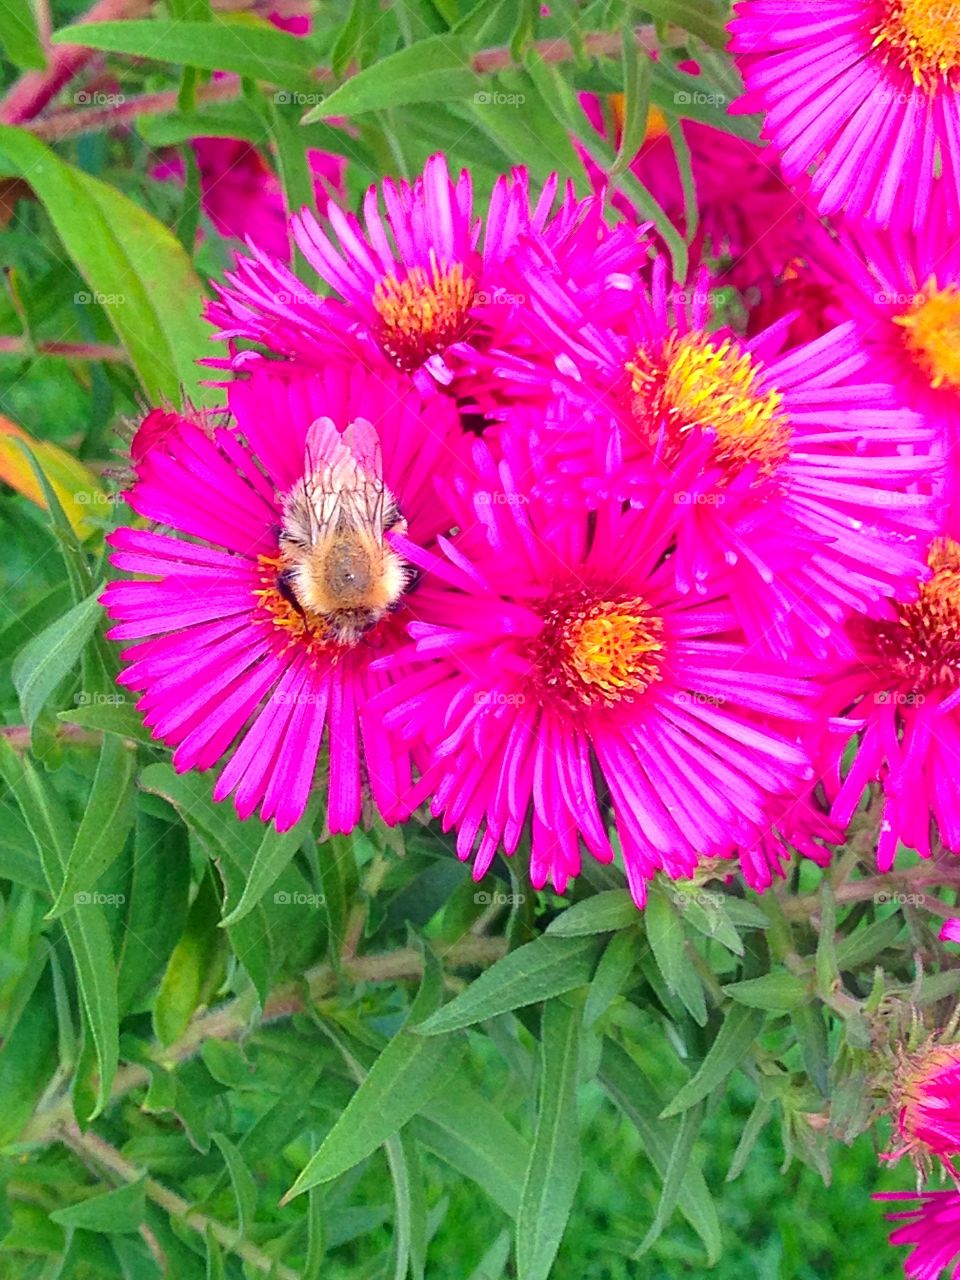 English hairy bumblebee sitting on pink flowers